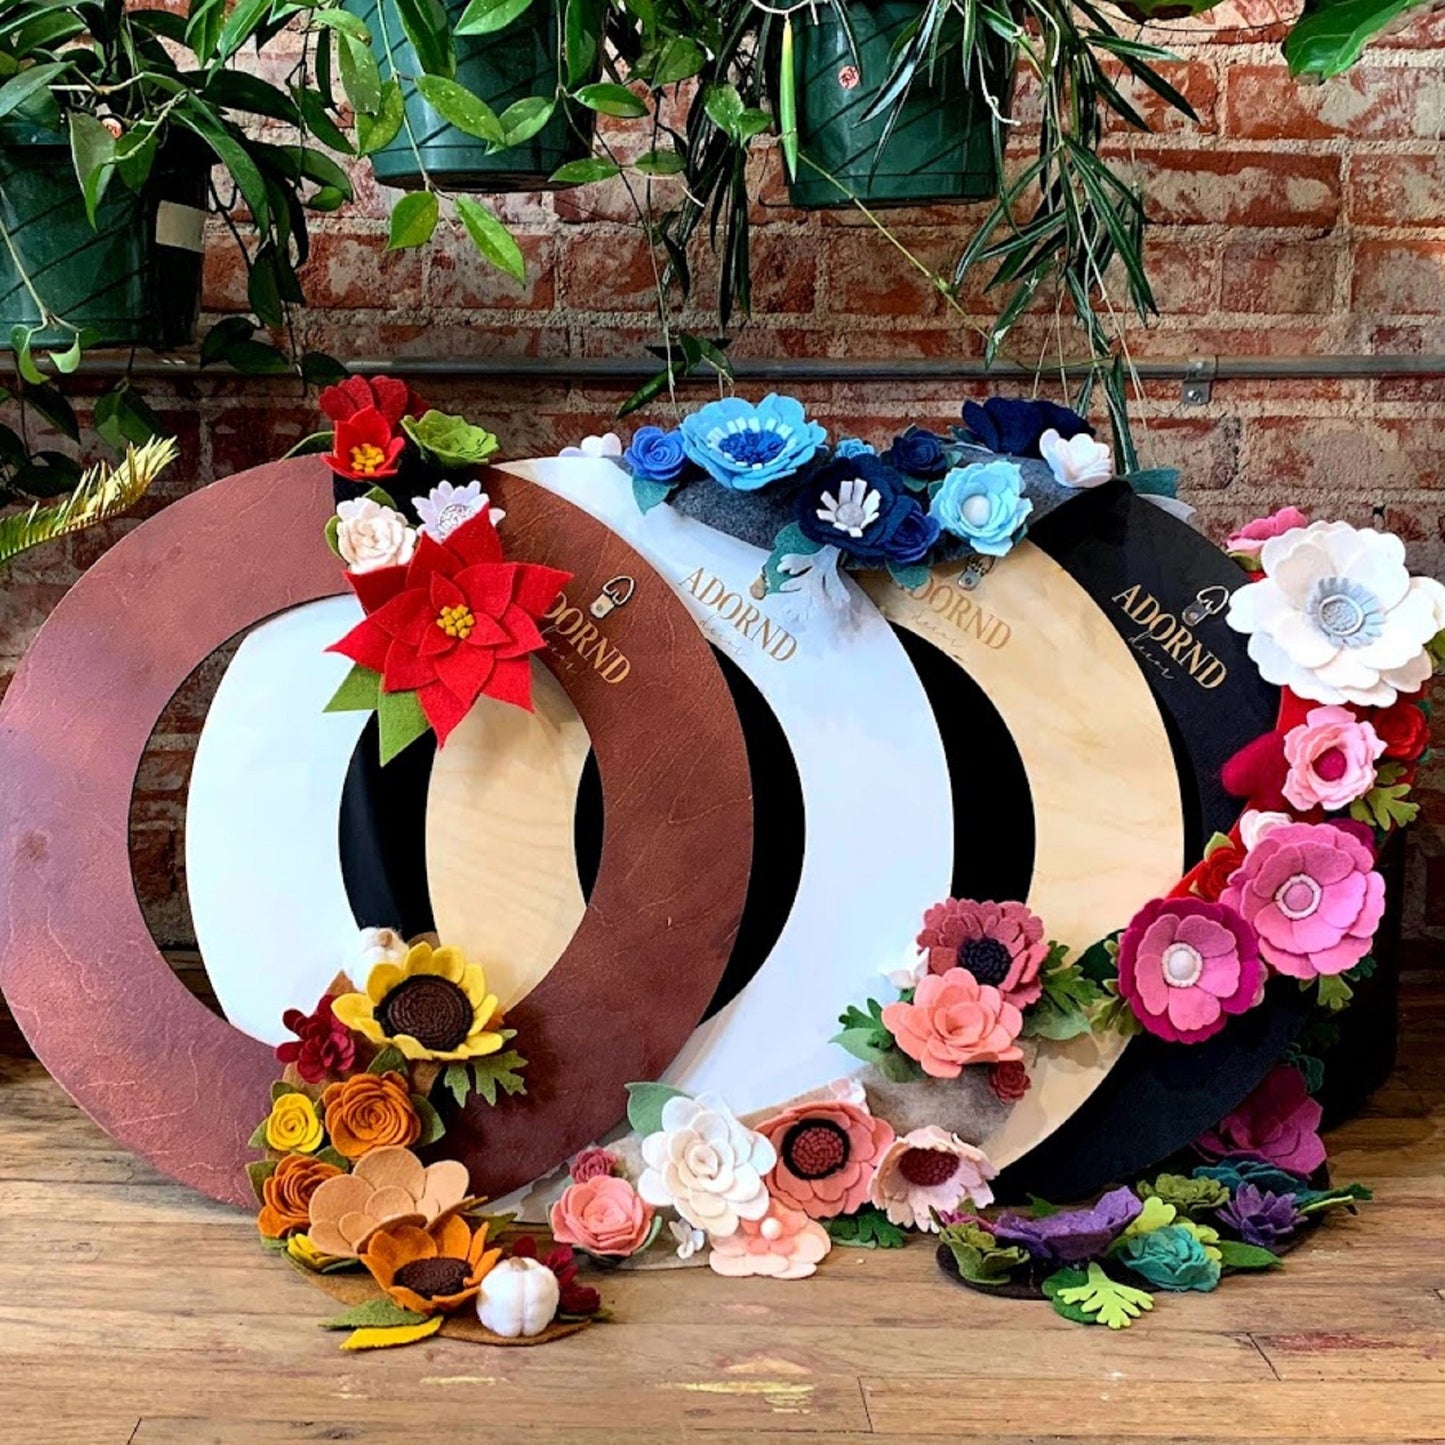 18" Wreath bases in all four colors shown with a variety of decorative attachments hanging around the bases. Wooden wreath base, felt flowers, handmade flowers, decorative attachments. 